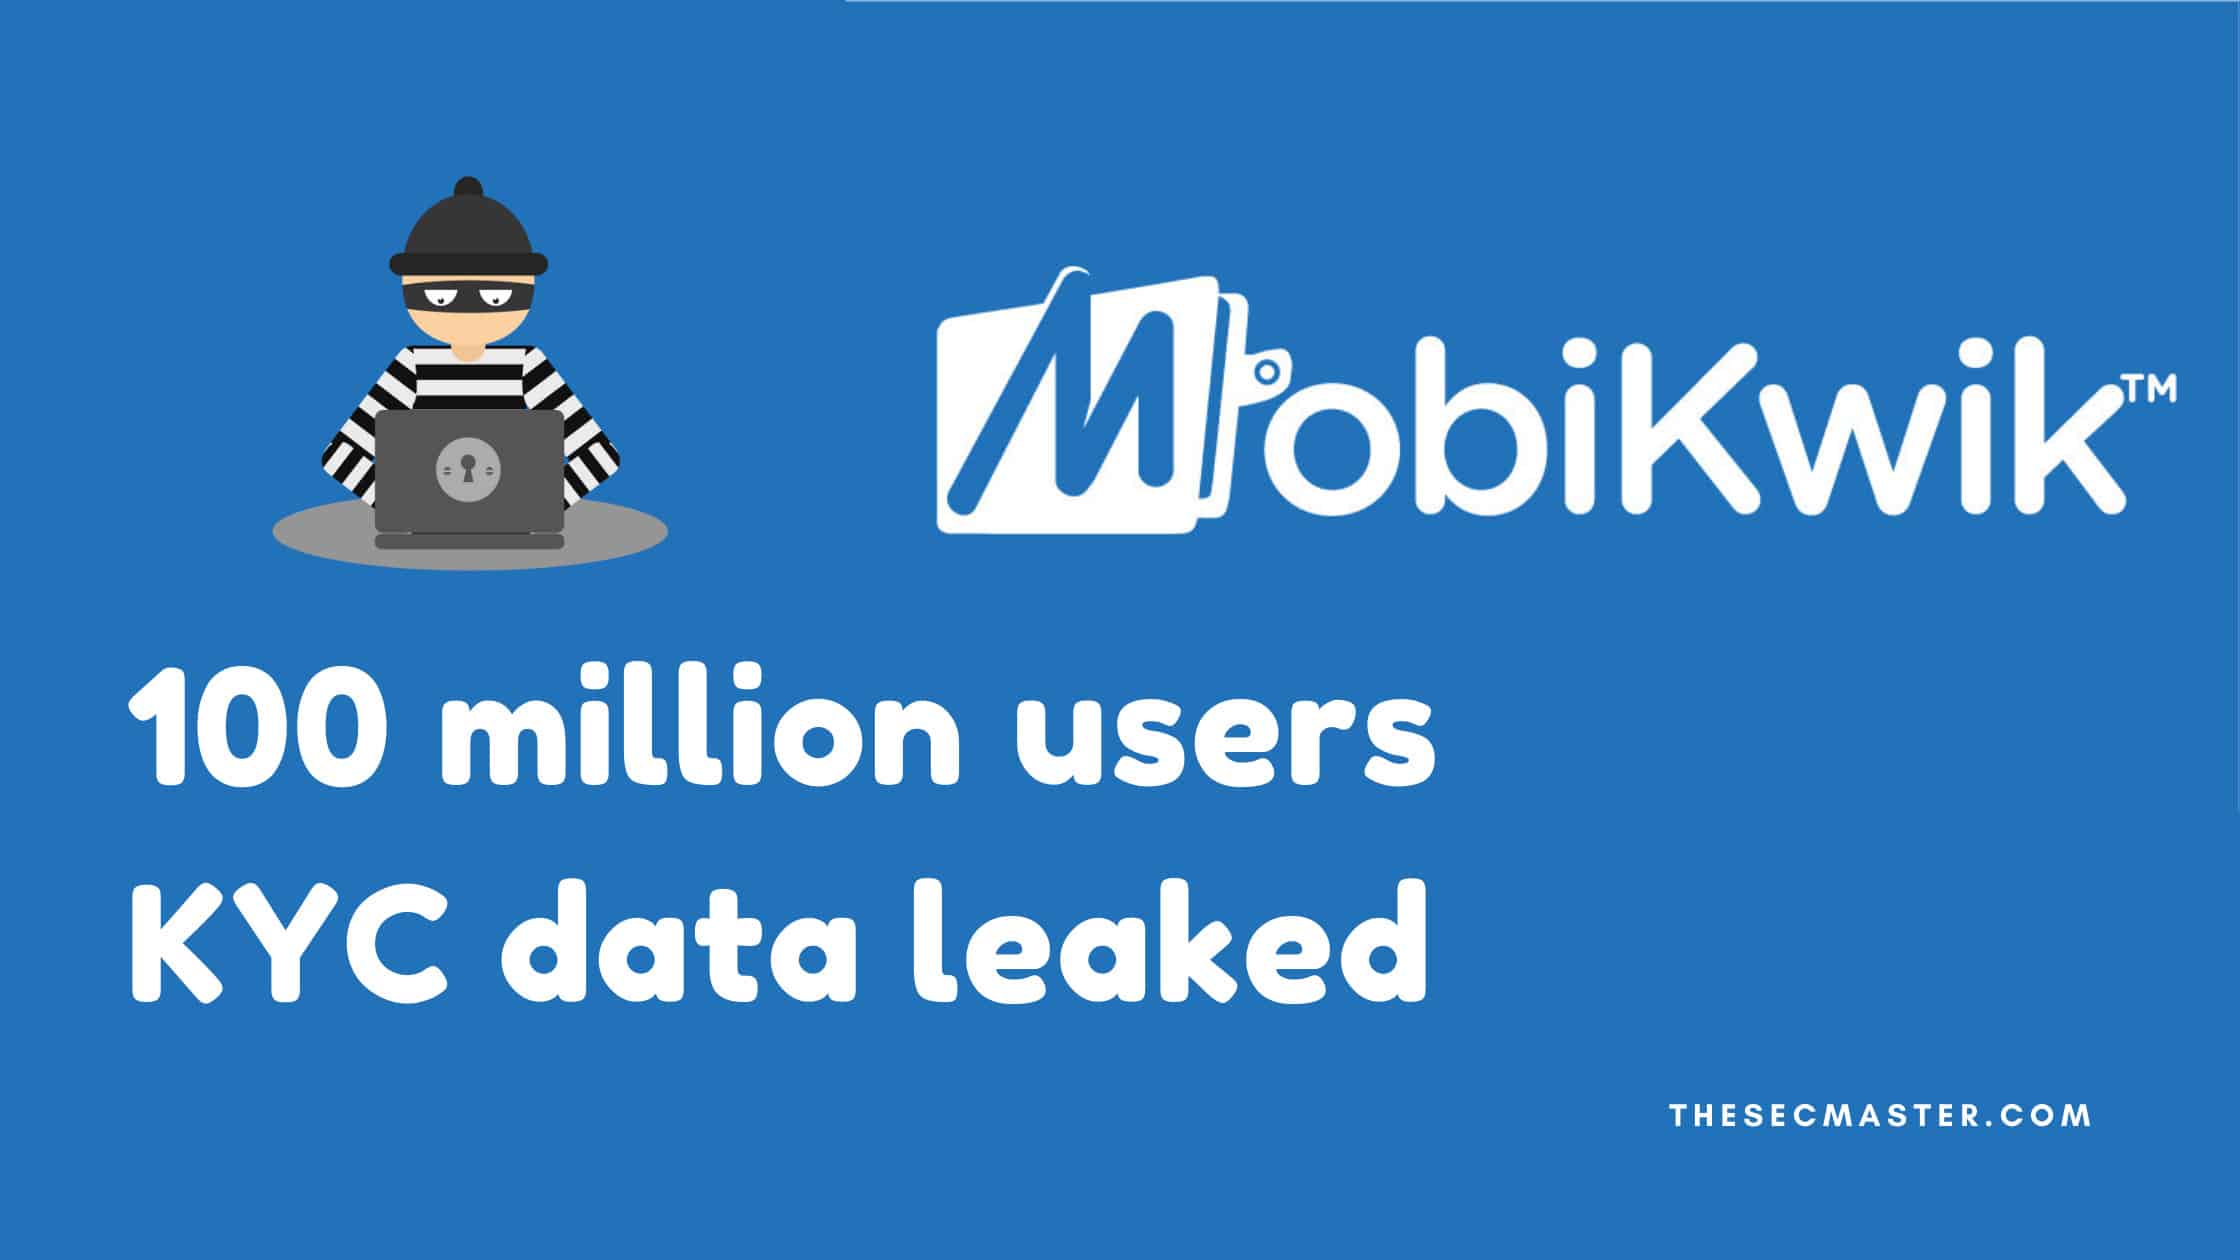 Kyc Data Leaked How To Check If Your Data Is Leaked In Mobikwik Data Leak